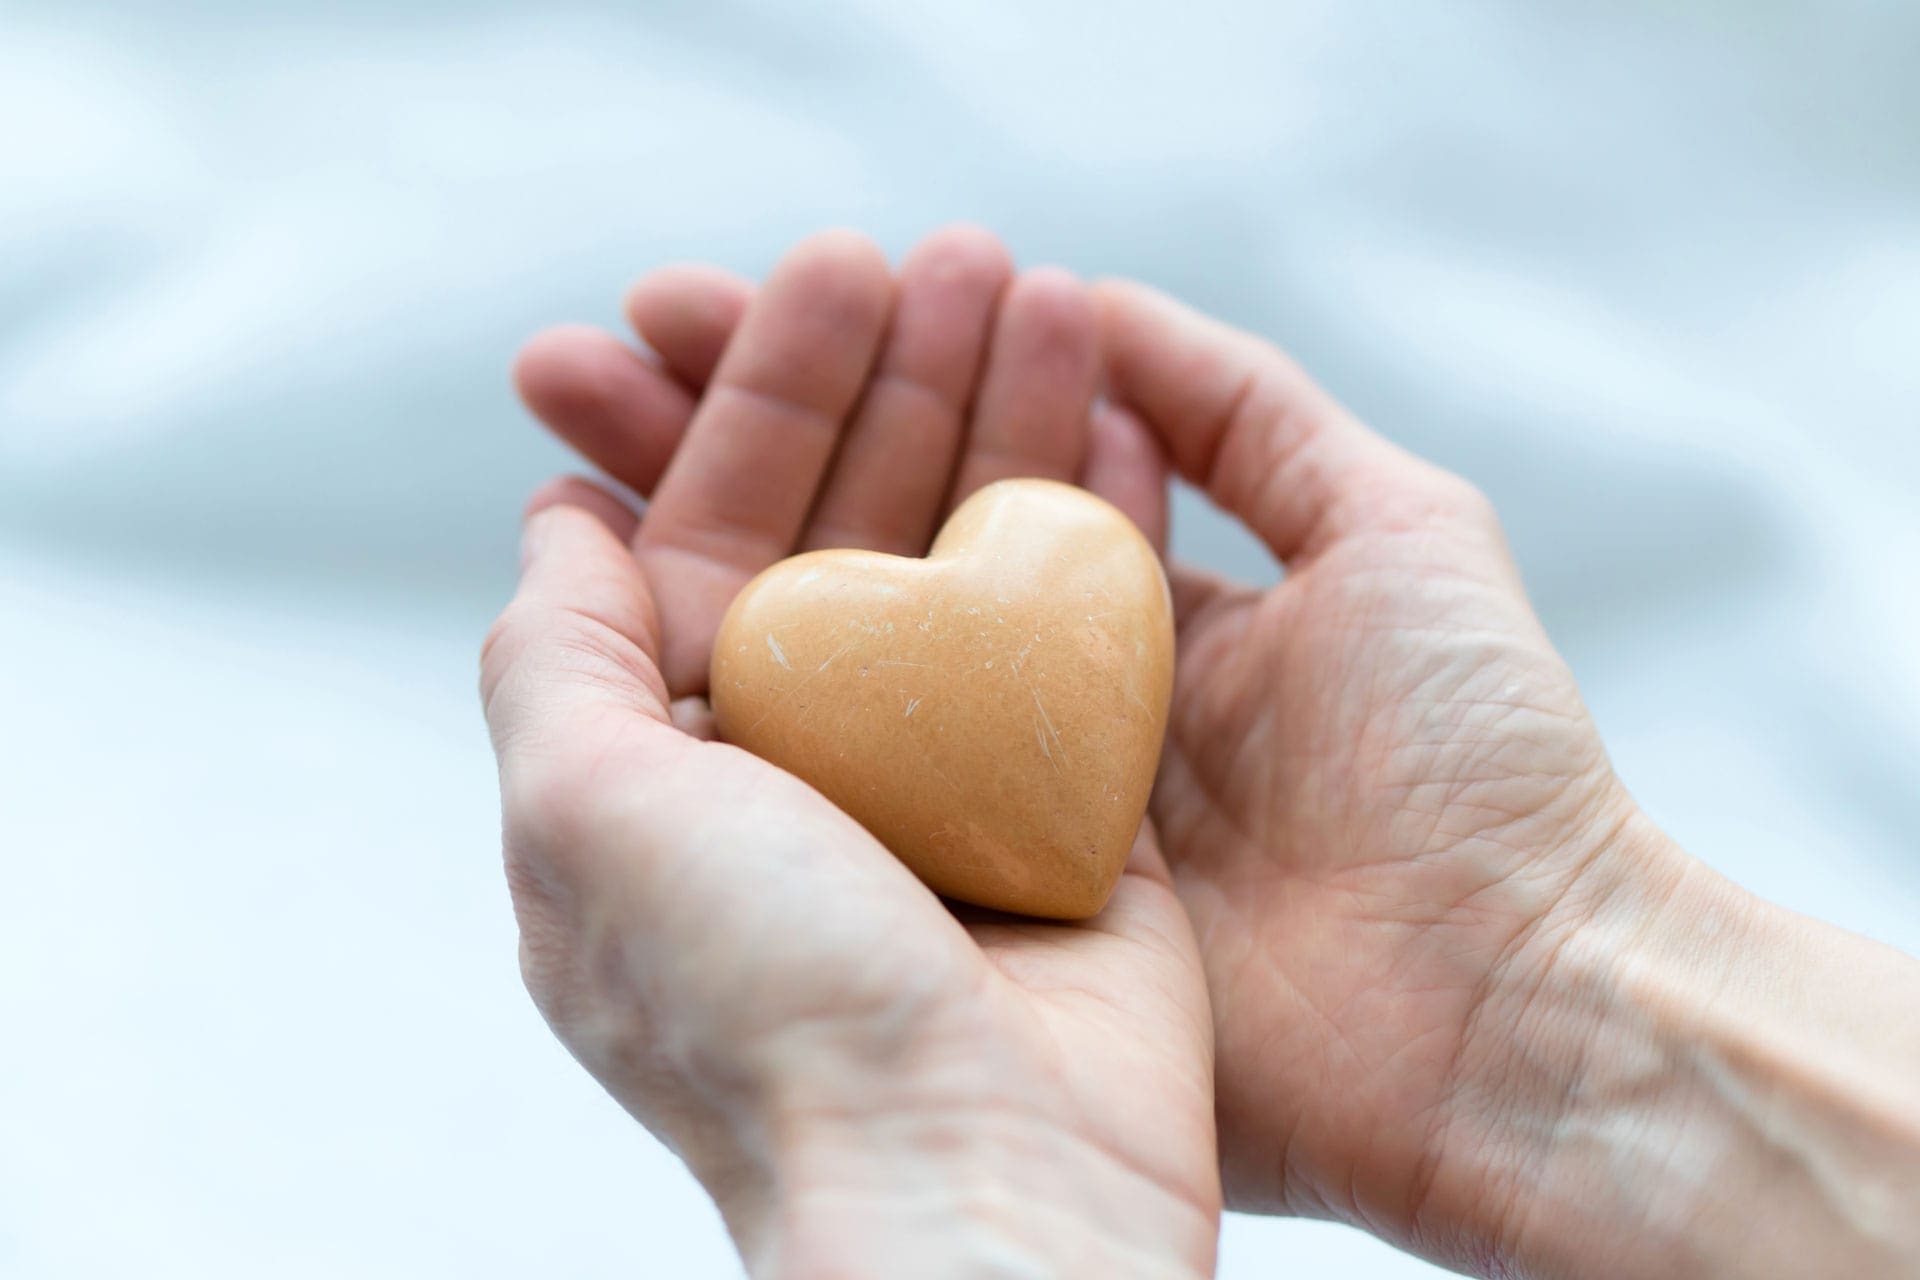 hands holding heart-shaped stone